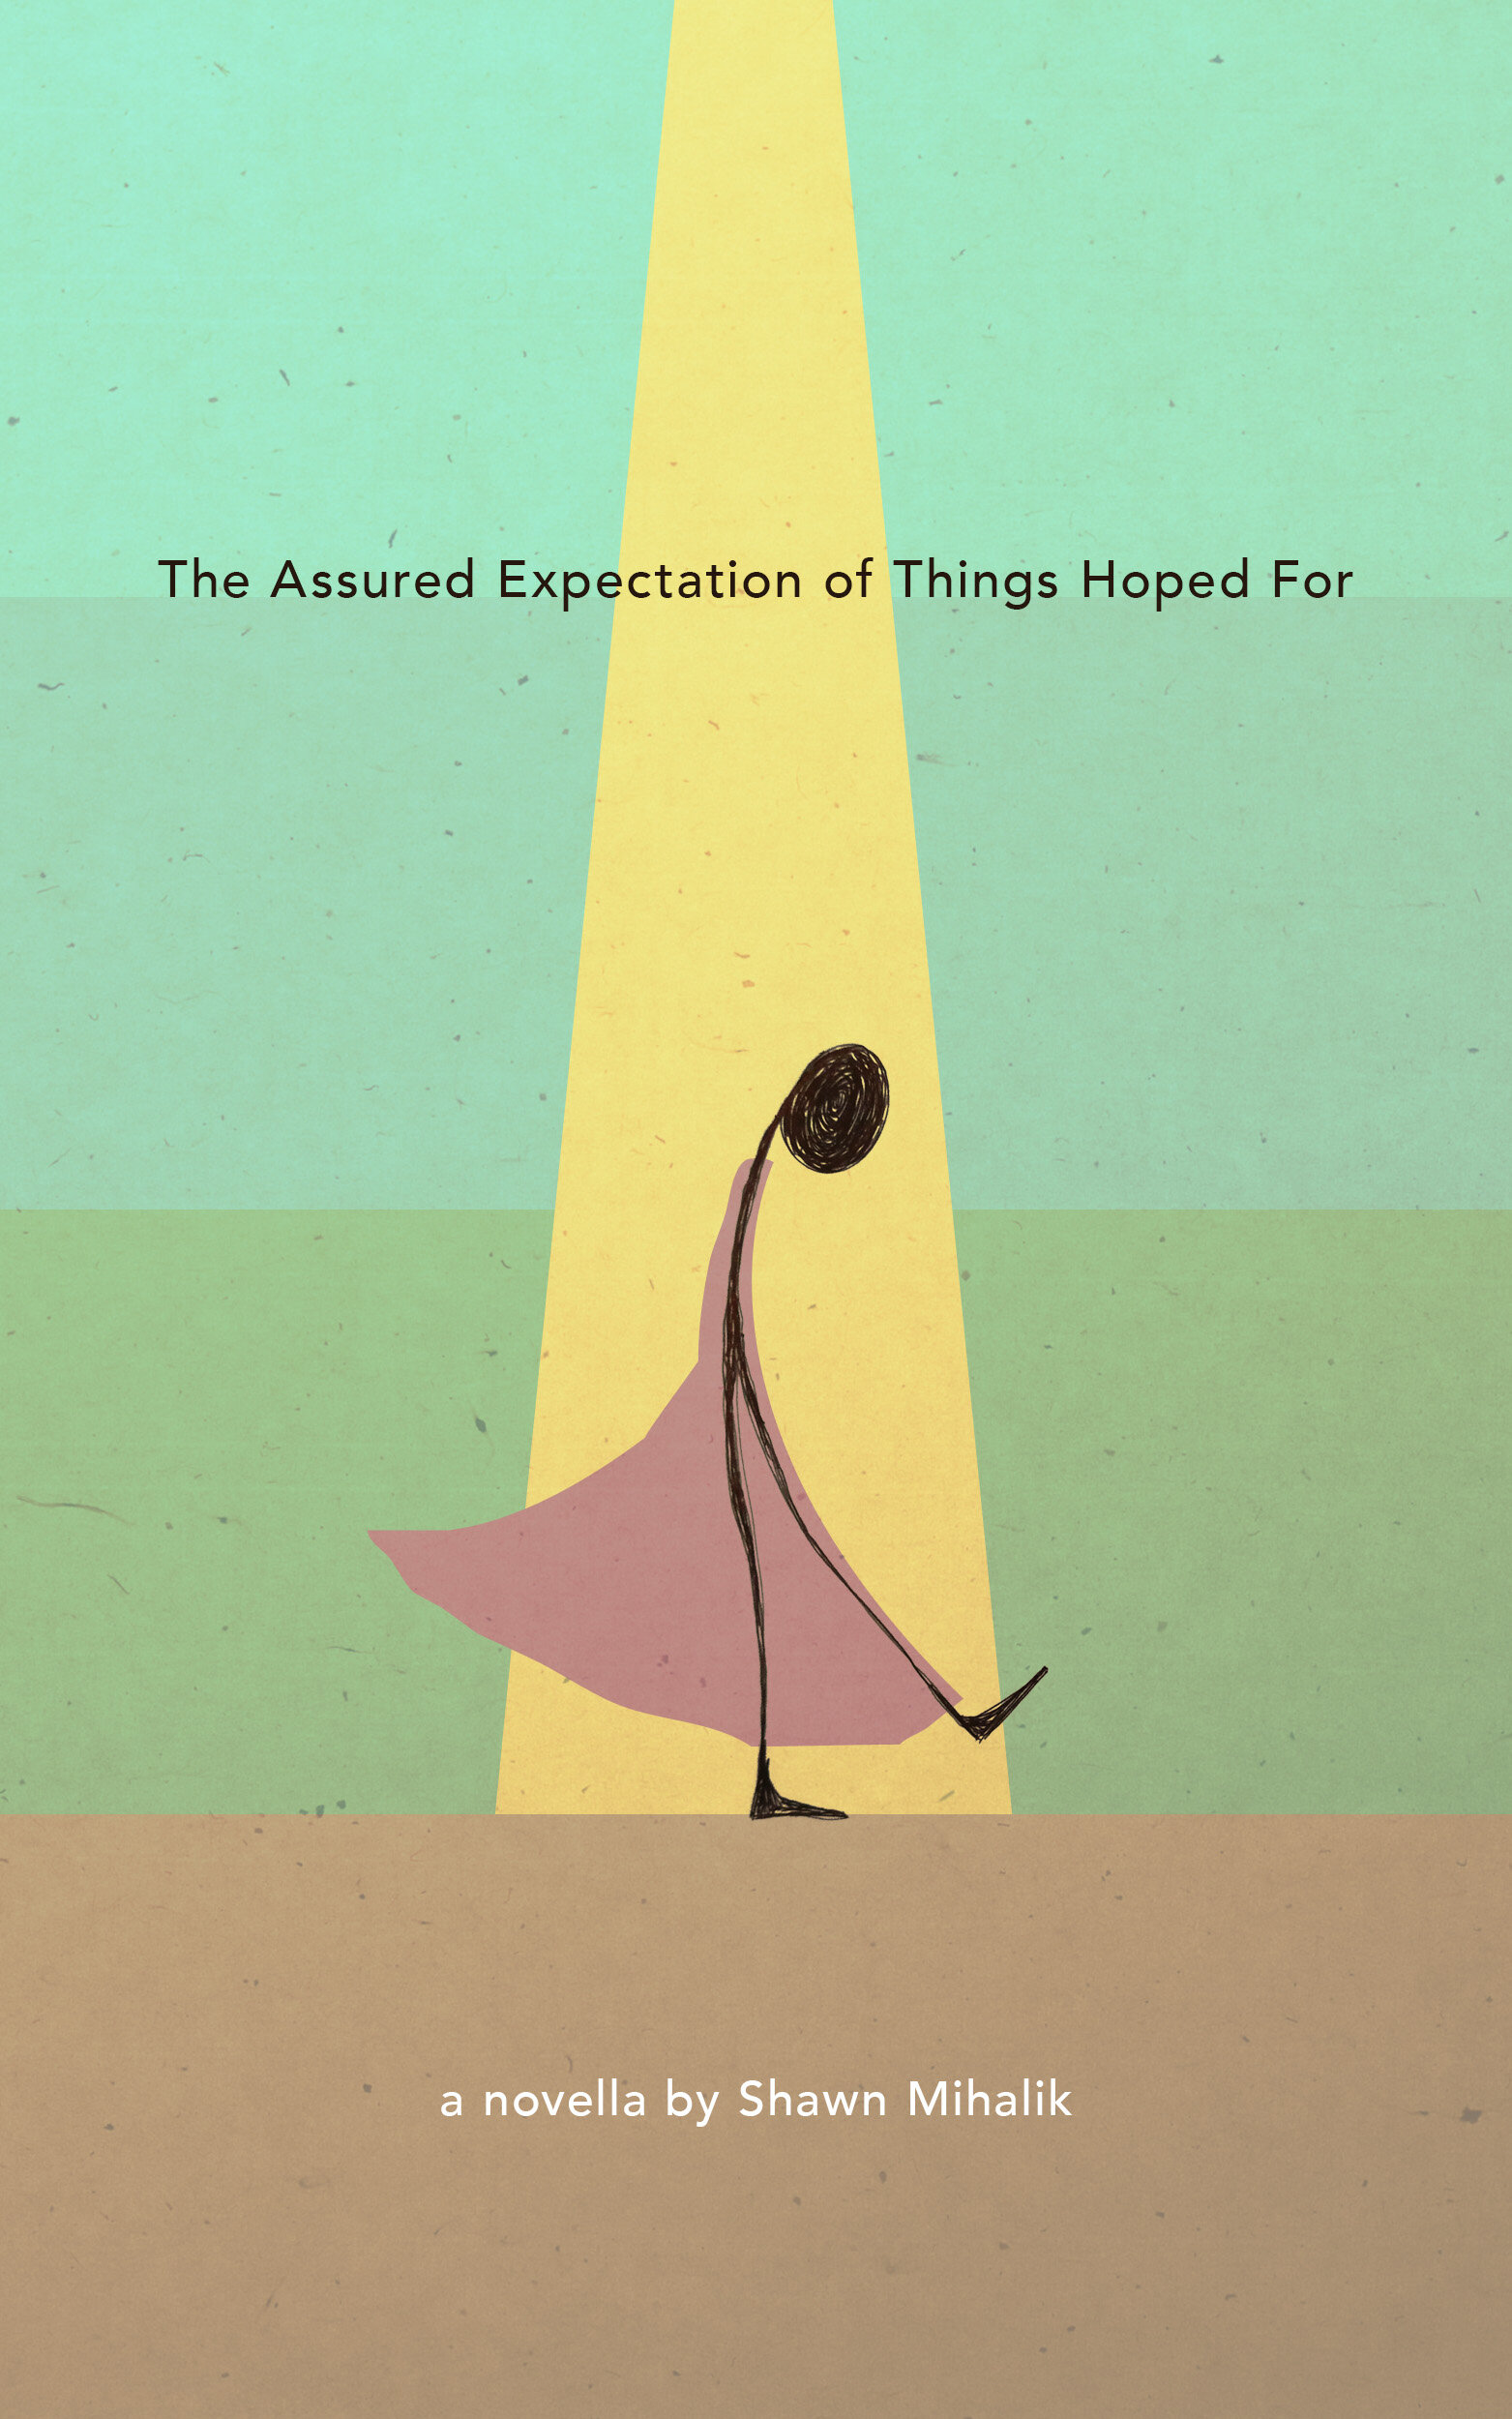   Title:  The Assured Expectation of Things Hoped For  Publisher:   Asymmetrical Press   Release Date:  November 17, 2015  Genre:  Novella / Literary Fiction  Length:  122 pages   Paperback    Amazon  |  Barnes &amp; Noble   Ebook    Kindle  |  iBook